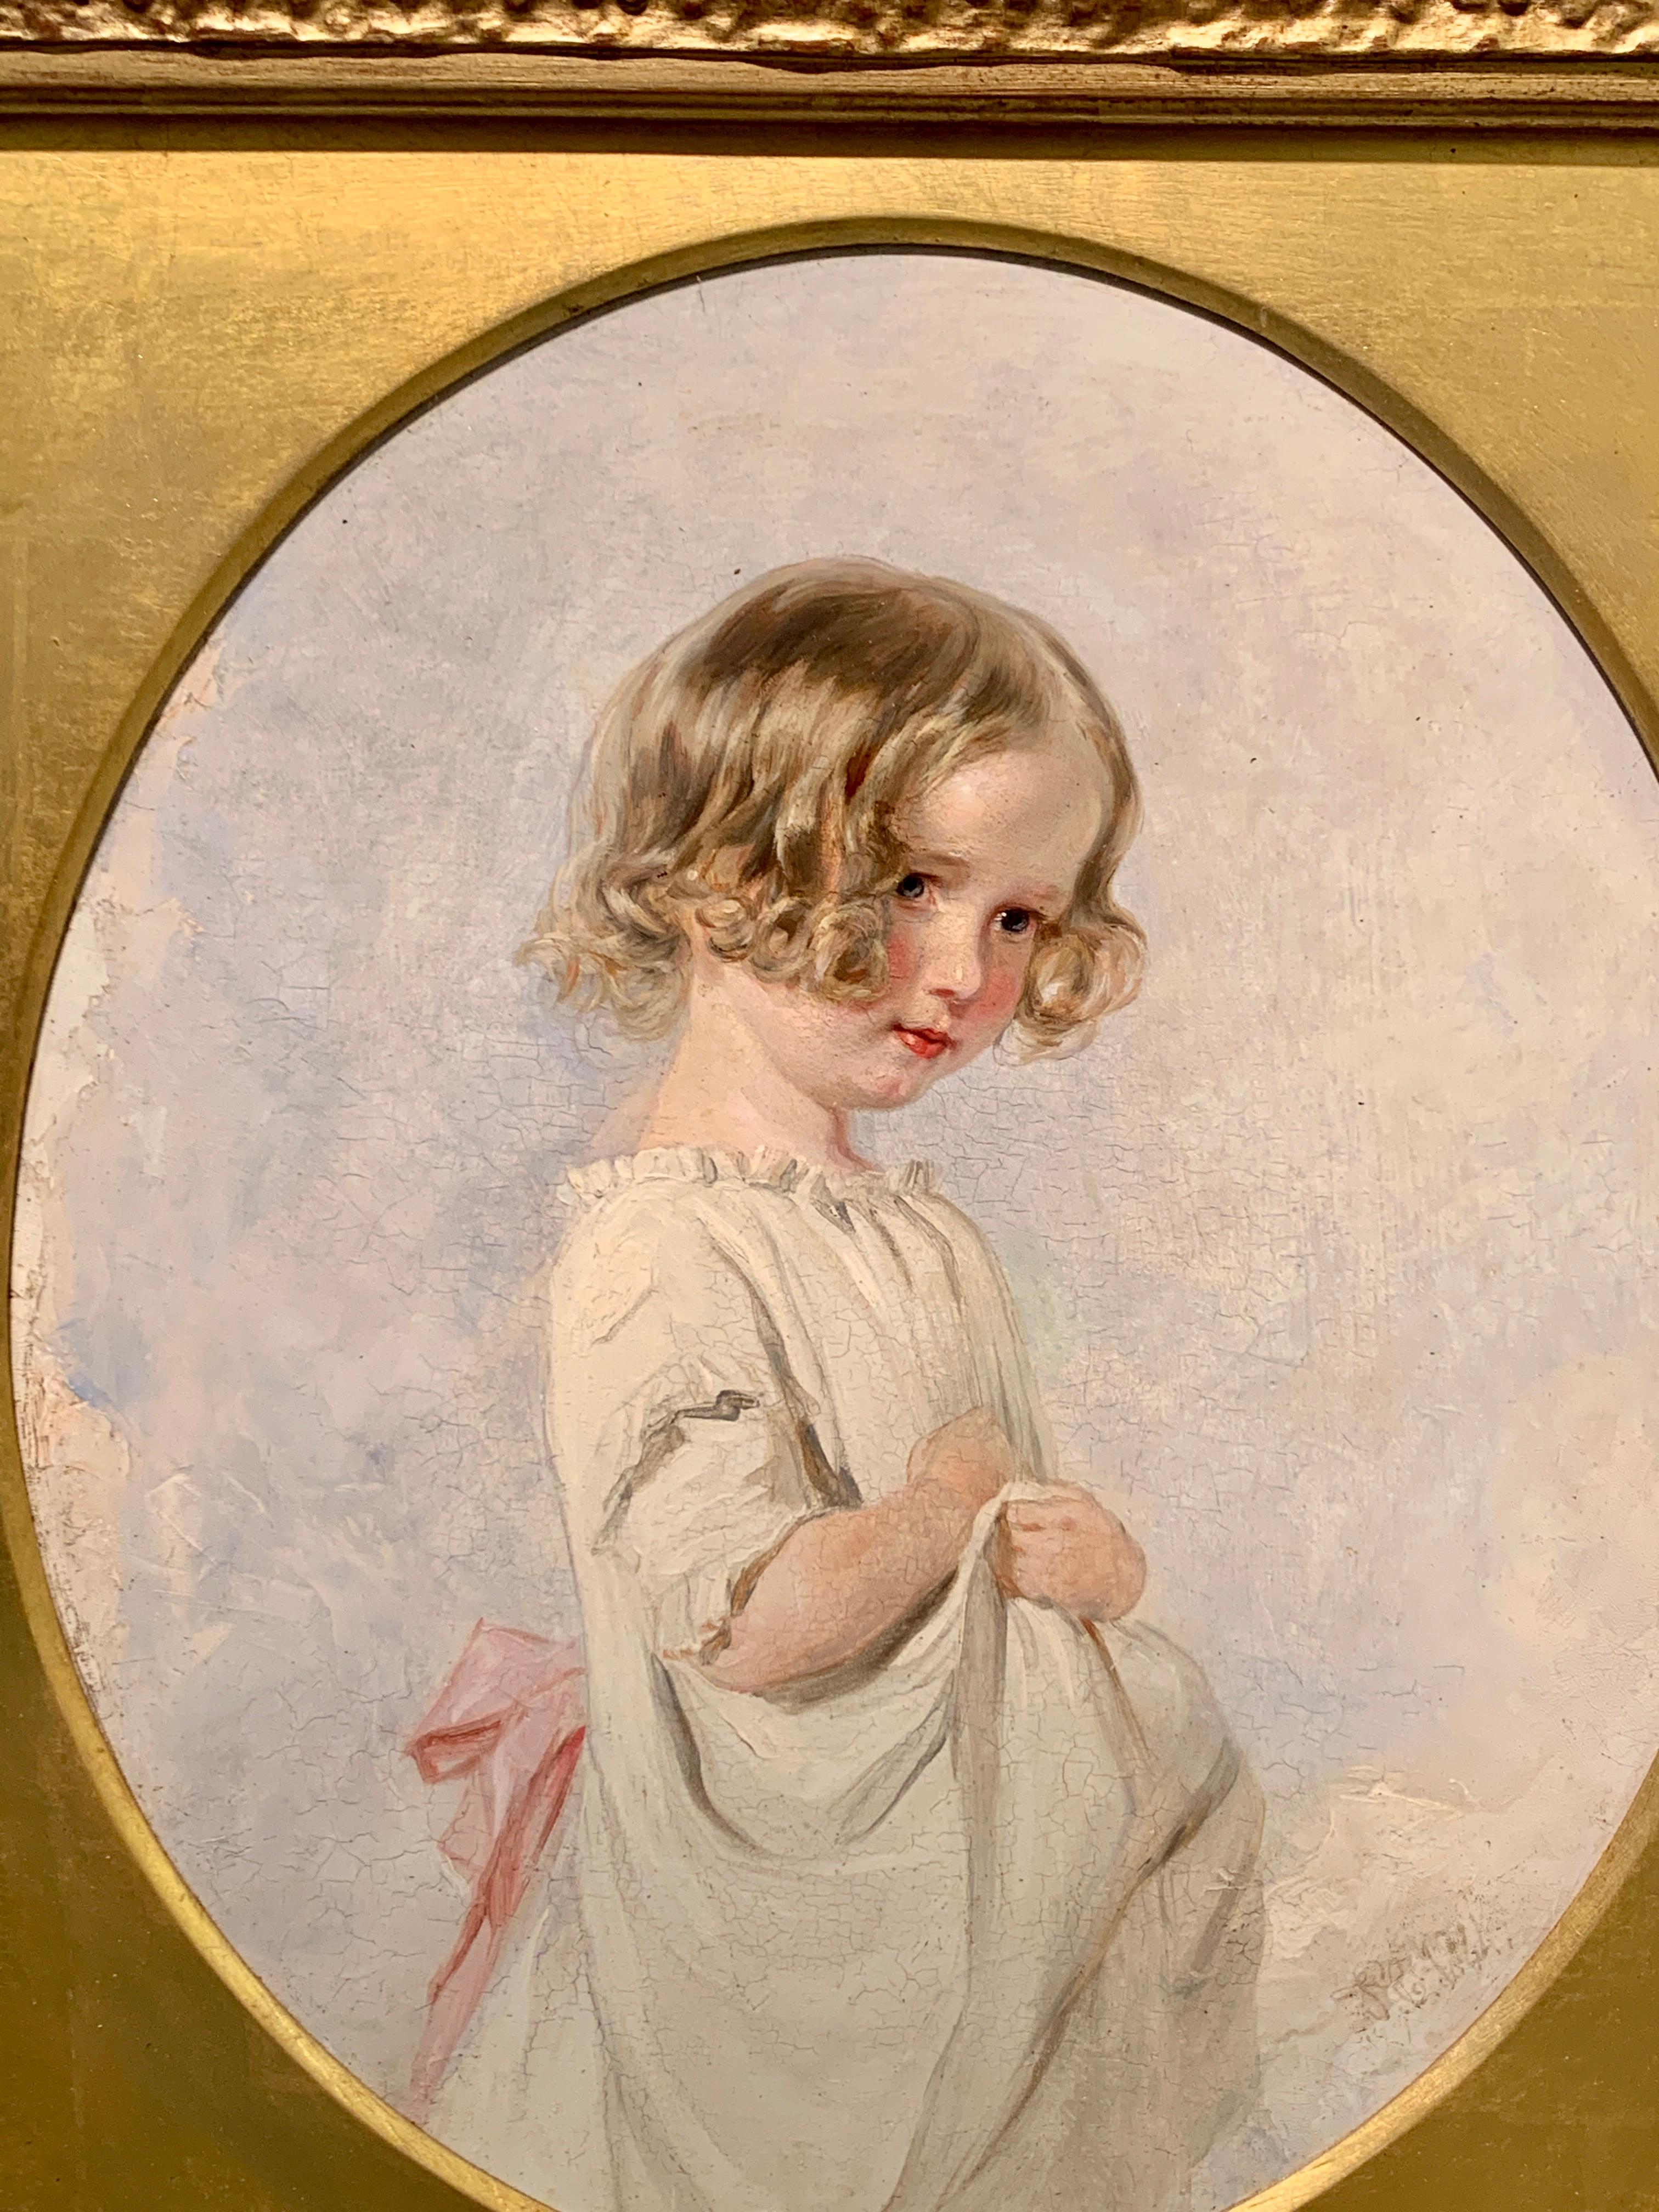 Antique 19th century English Victorian portrait of a blond haired young girl - Painting by Charles Robert Leslie R.A.